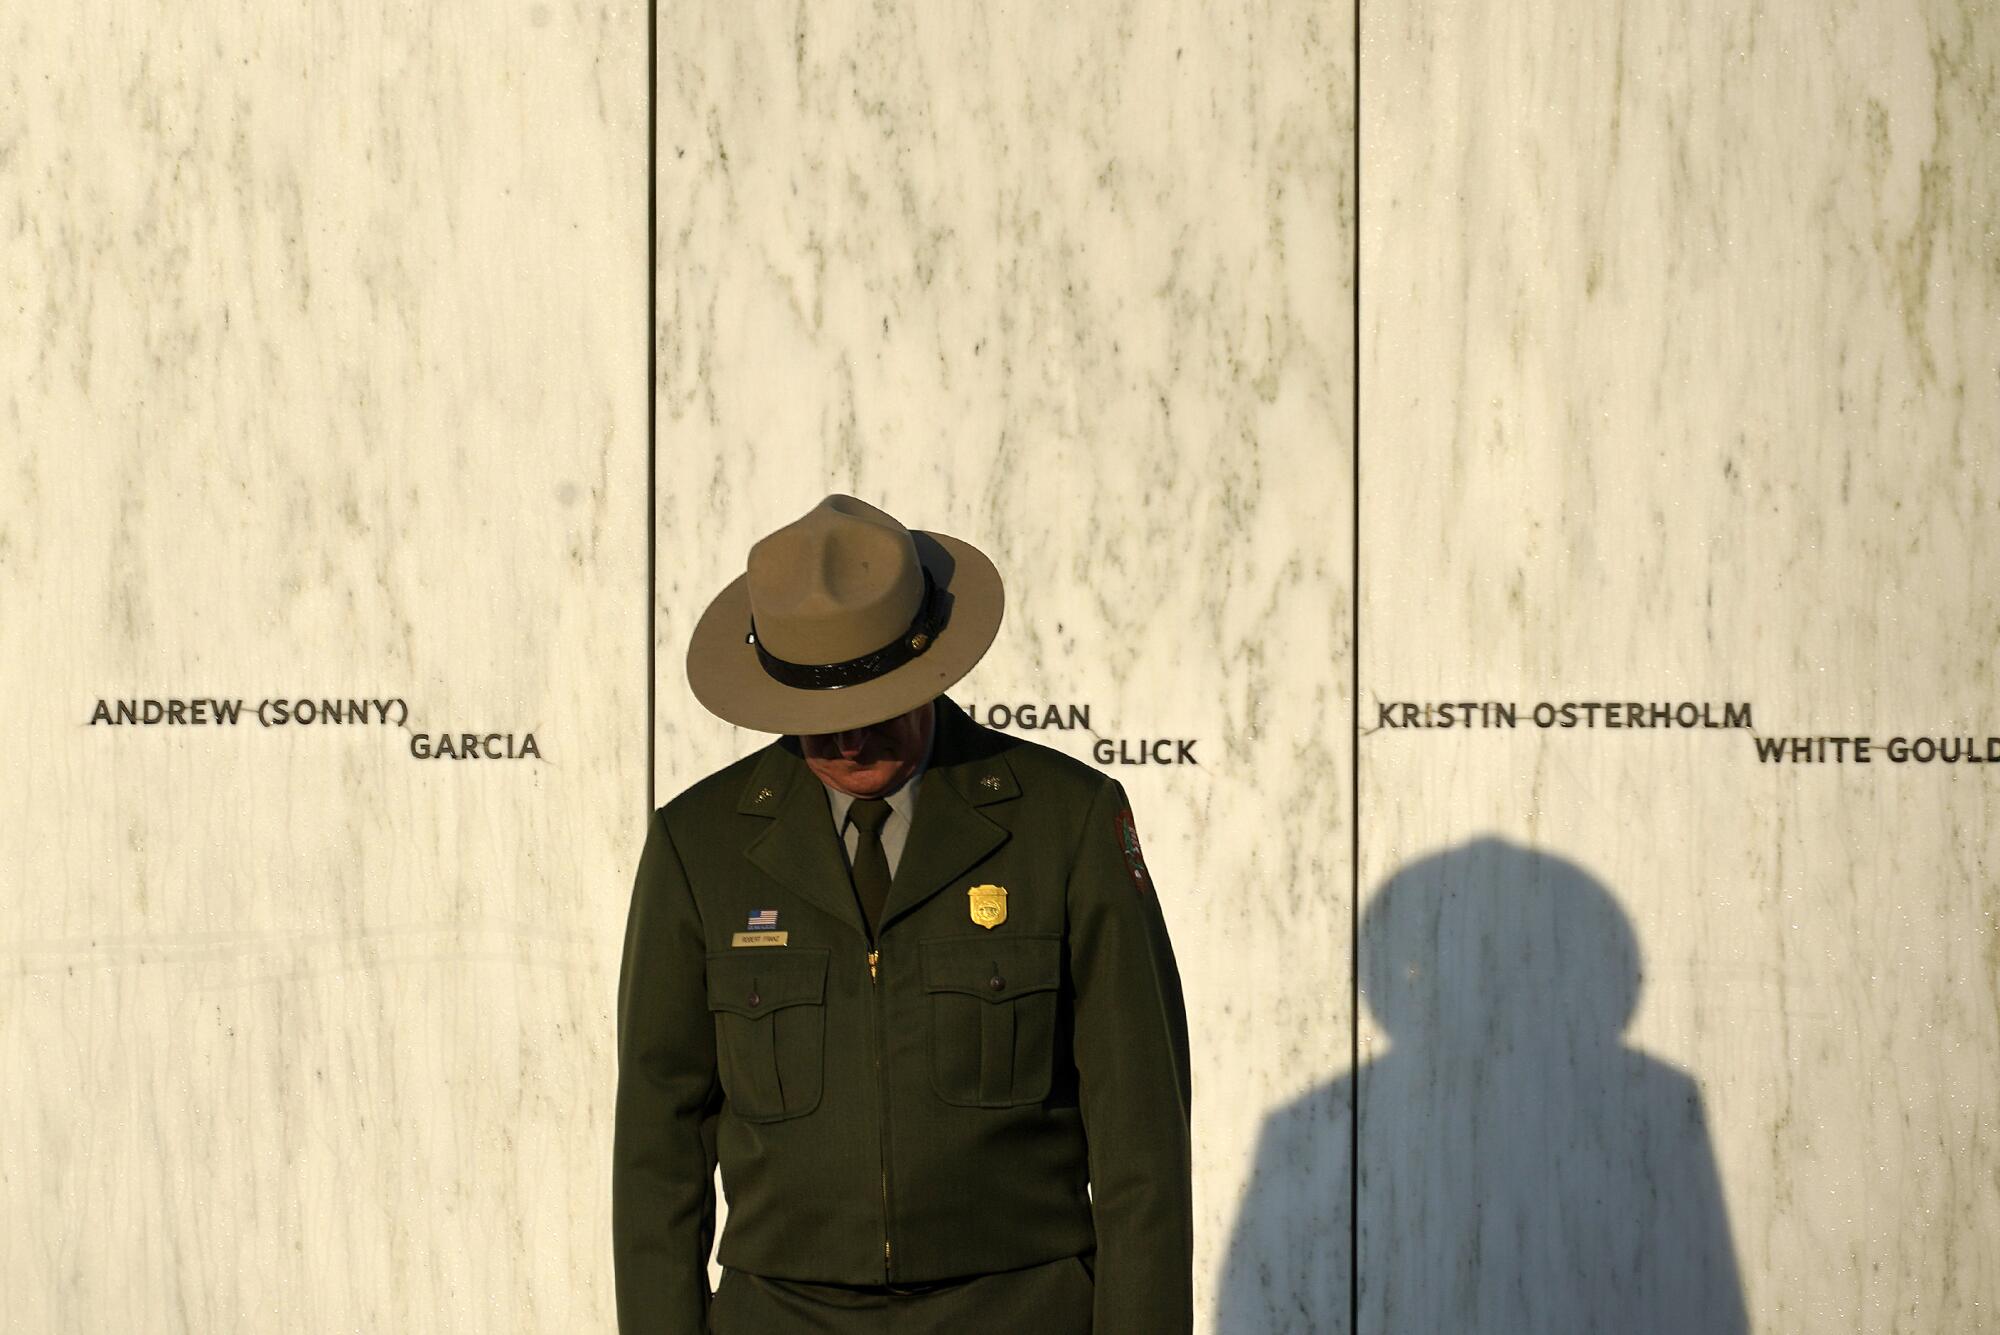 A National Park Service ranger stands in front of the Wall of Names with head bowed.